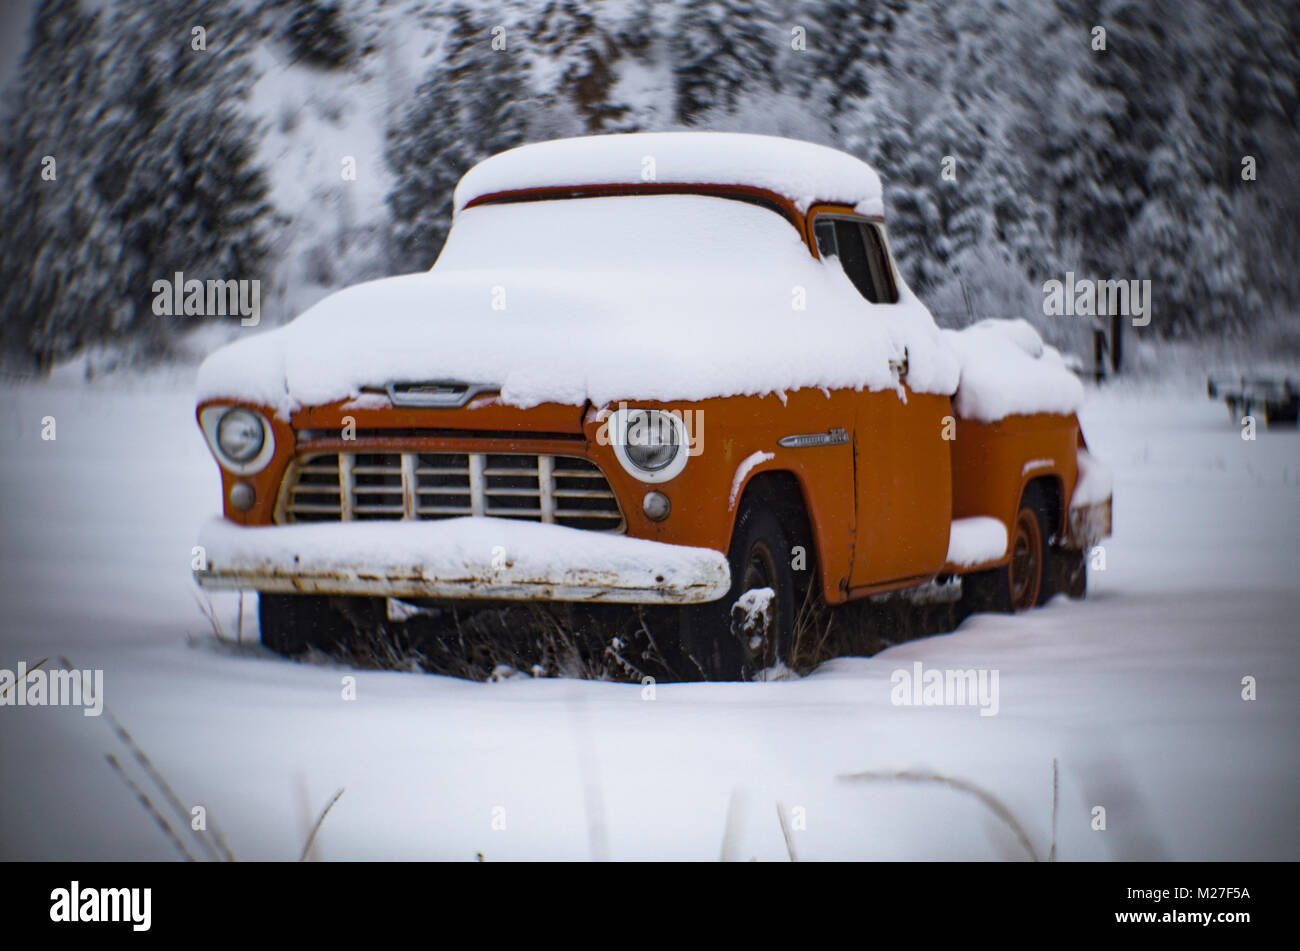 An orange 1956 3600 Chevrolet pickup truck in a snow covered landscape near Perma, Montana Stock Photo